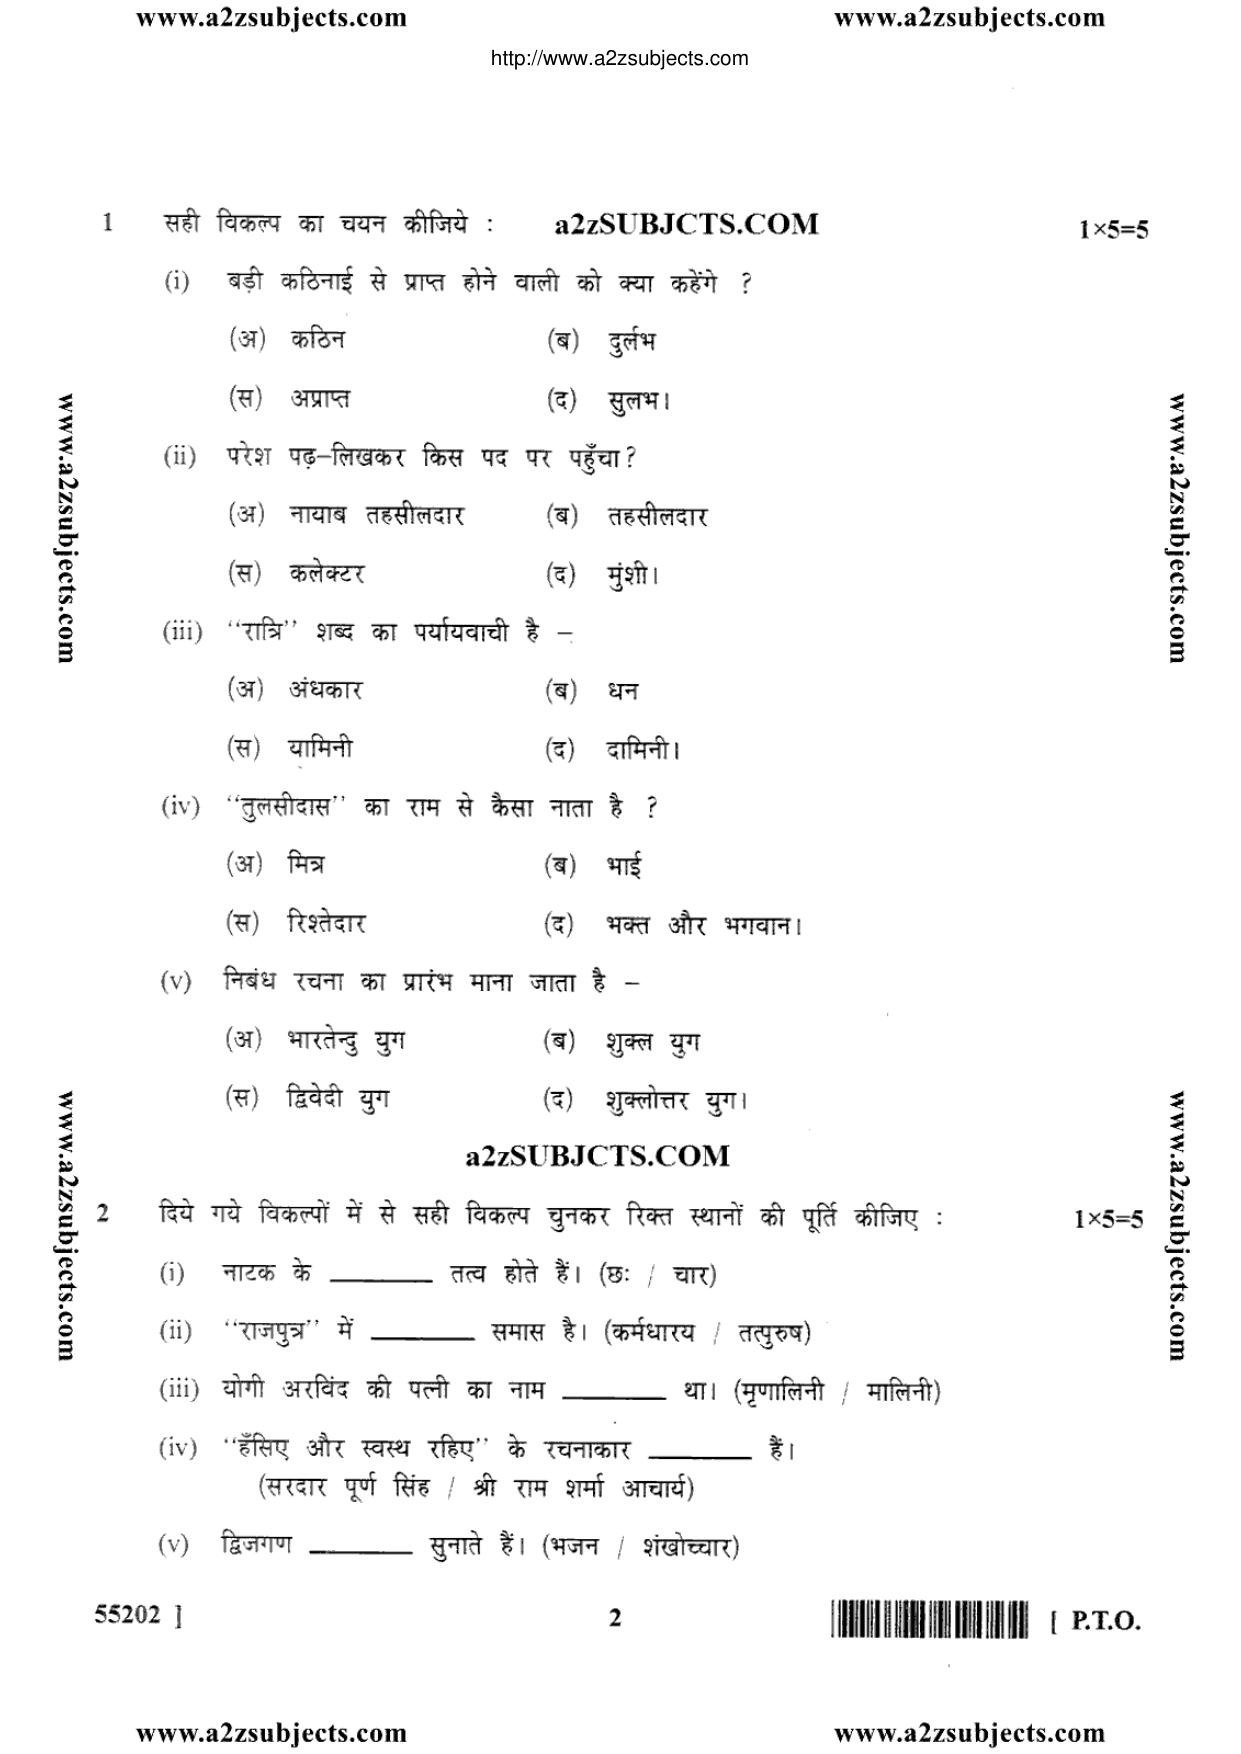 MP Board Class 10 Marathi 2017 Question Paper - Page 2